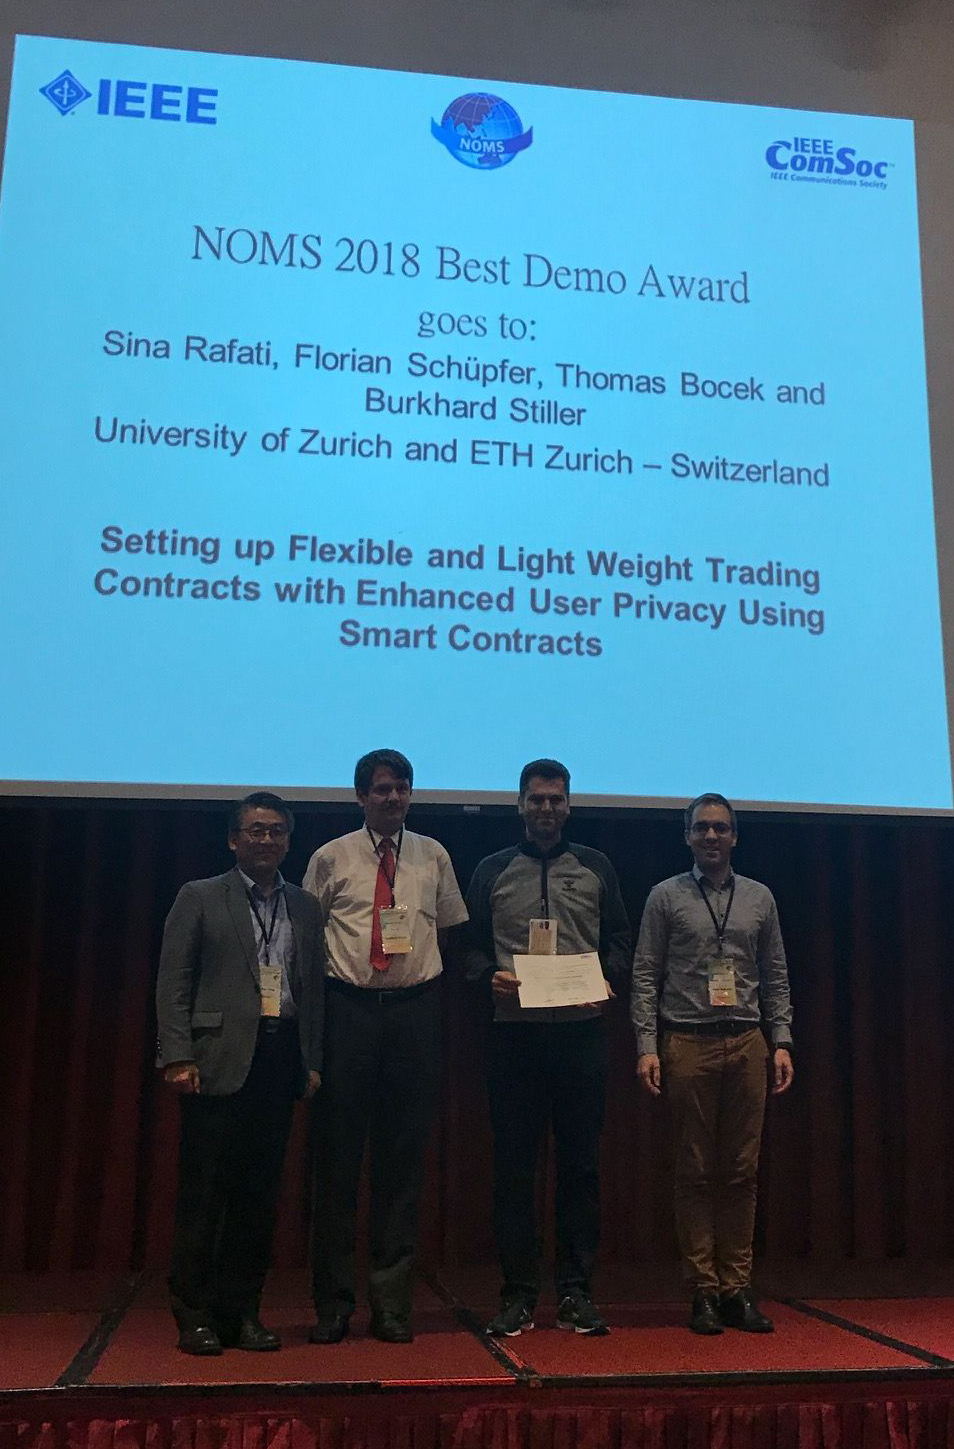 16th IFIP/IEEE NOMS 2018 Best Demo Award Team at NOMS with the Plaque Received: from the left, Prof. Dr. James Hong, Prof. Dr. Burkhard Stiller, Sina Rafati, Prof. Dr. Remi Badonnel (picture thanks to Dr. Marinos Charalambides) 